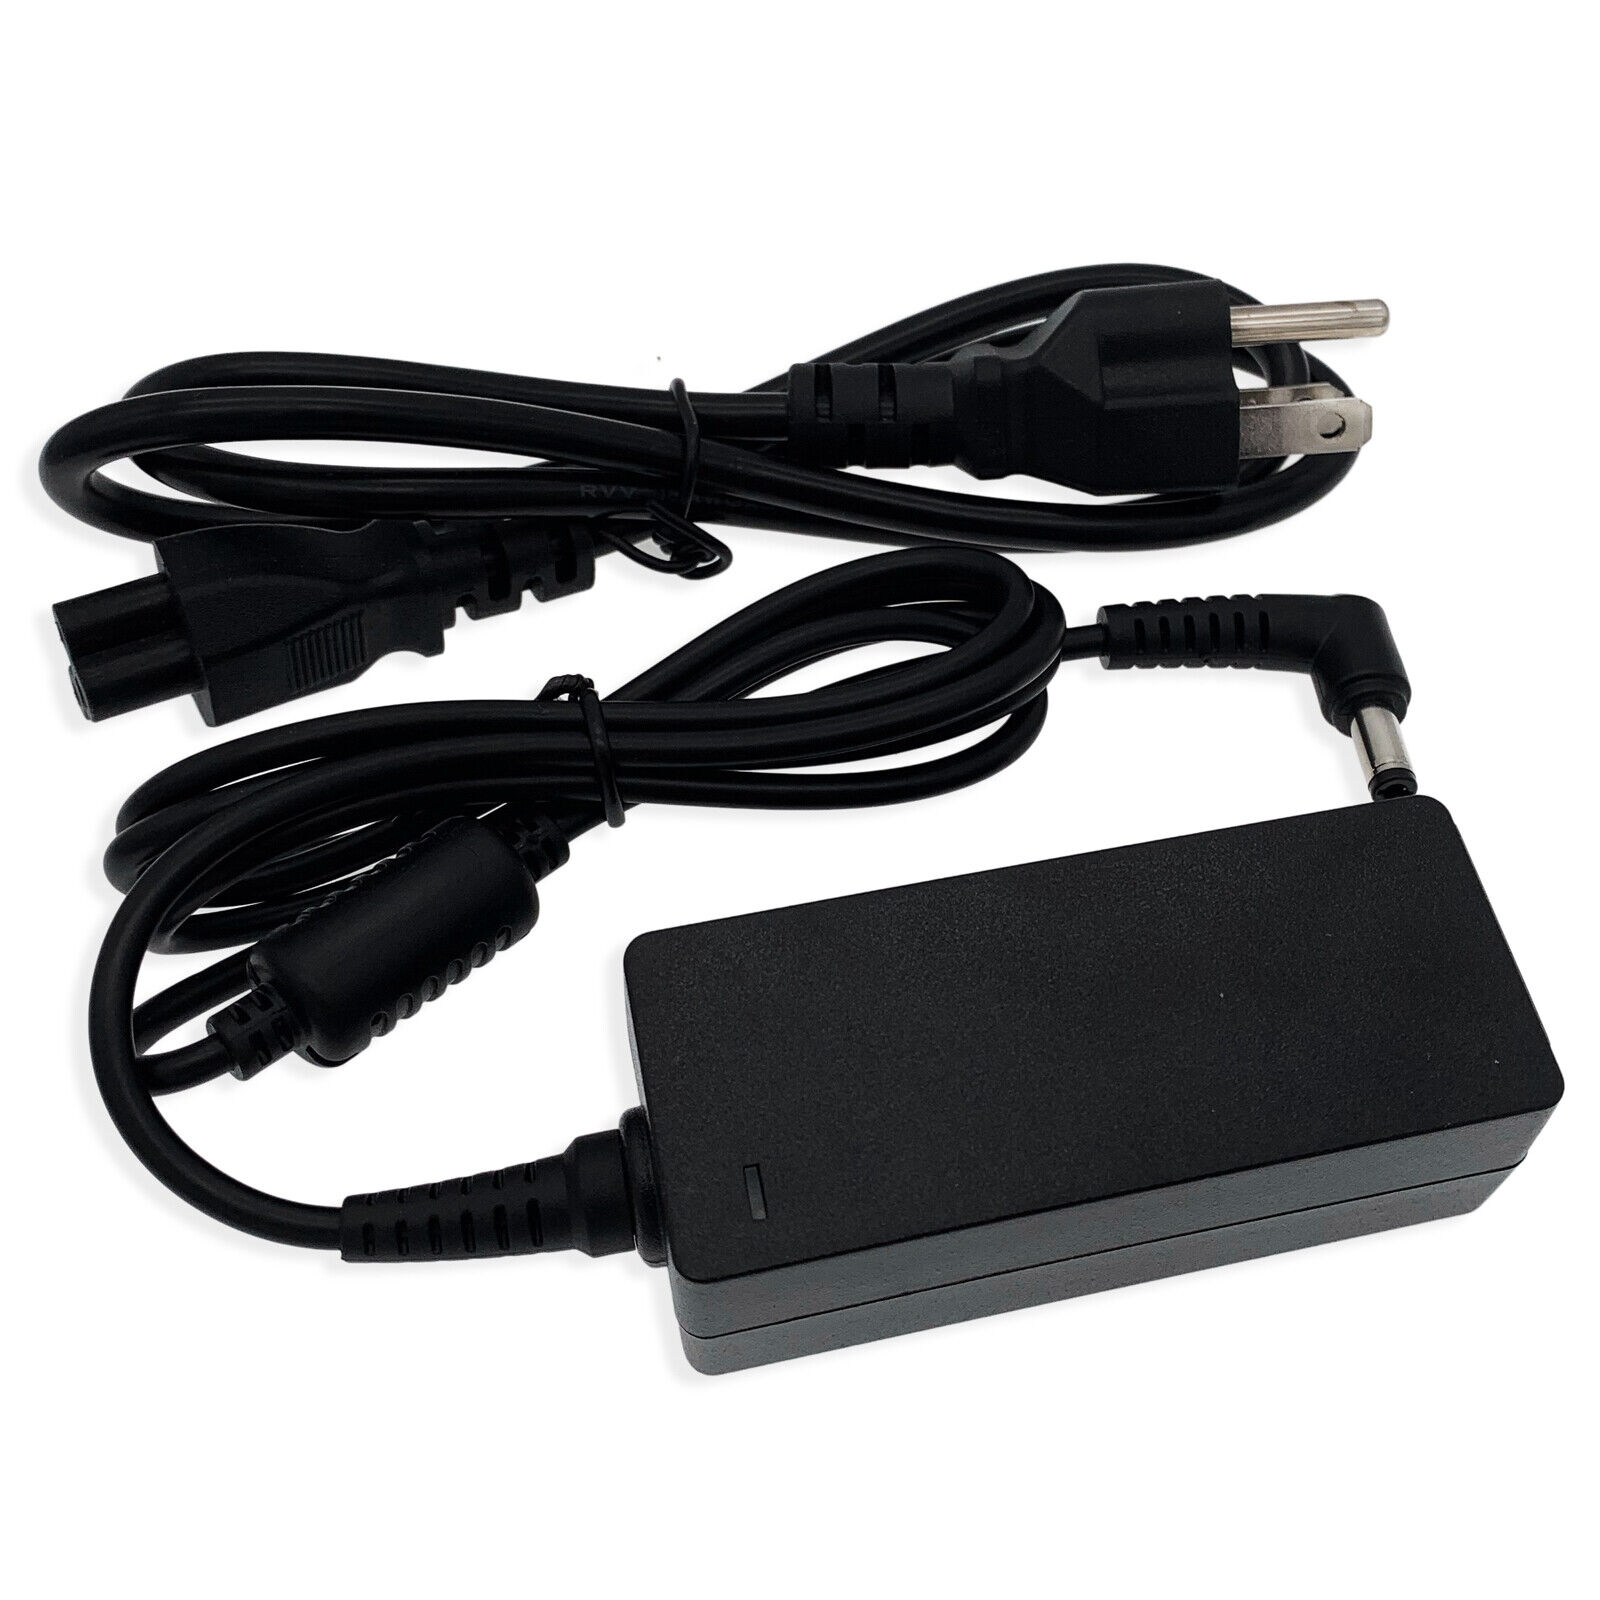 *Brand NEW*Arris Gateway Modem BGW210-700, Genuine Replacement Charger for Modems, Routers, and Other Devices